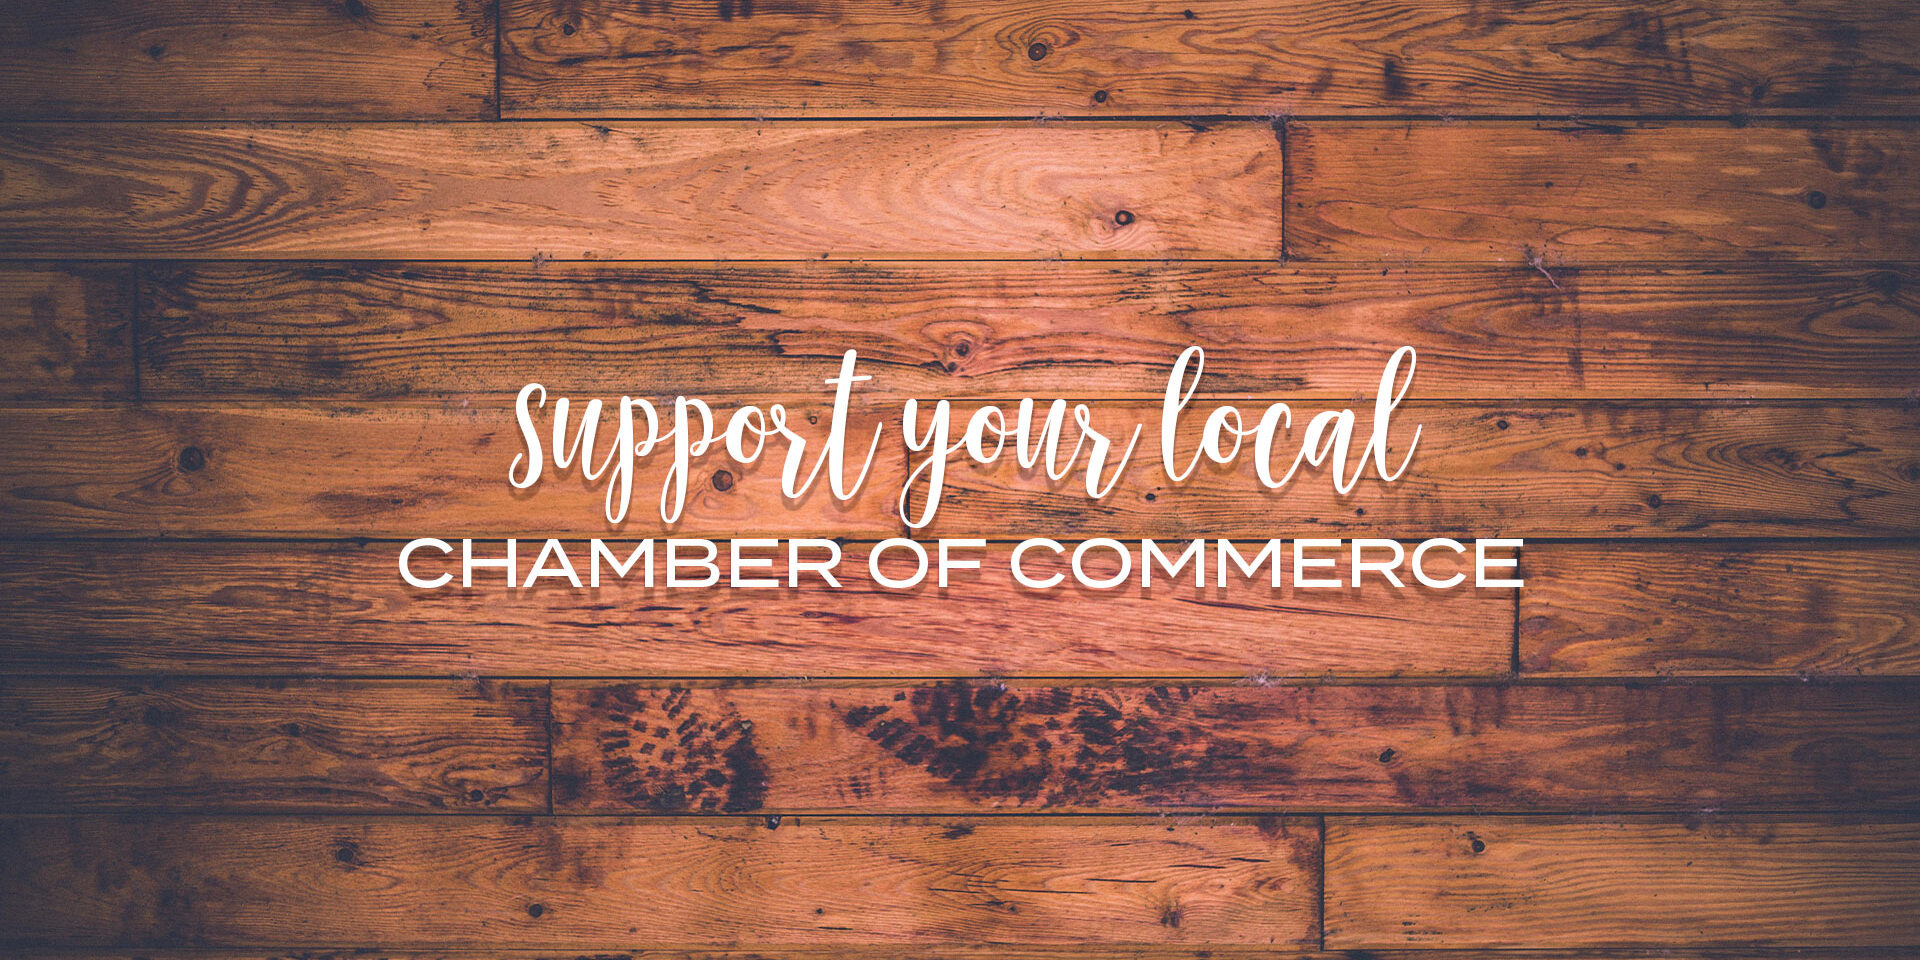 Support your local chamber on national local chamber of commerce day